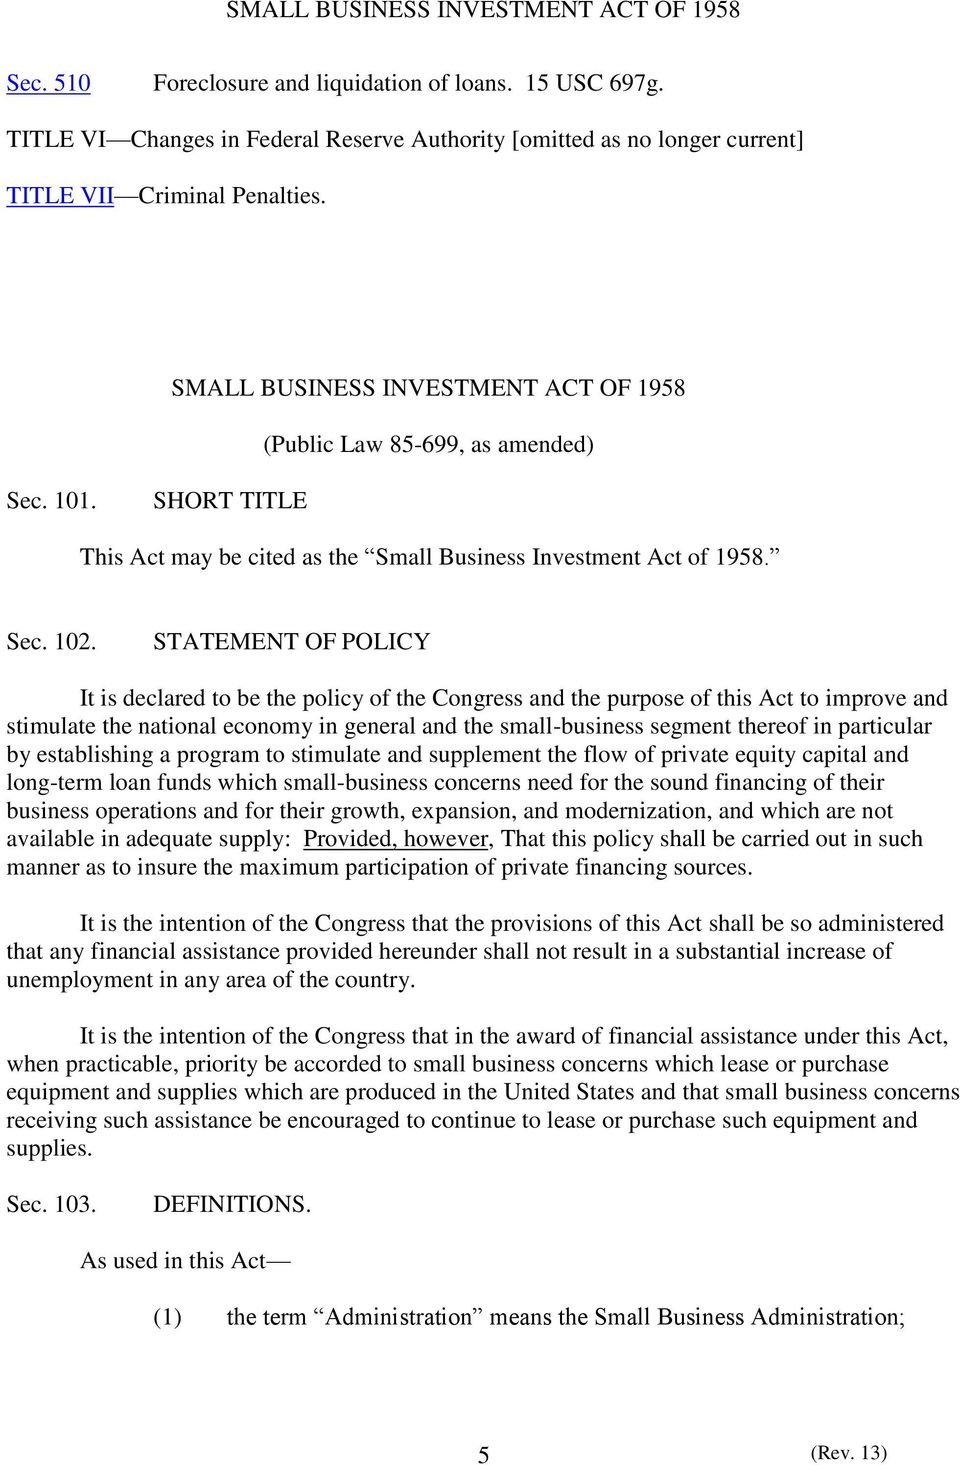 STATEMENT OF POLICY It is declared to be the policy of the Congress and the purpose of this Act to improve and stimulate the national economy in general and the small-business segment thereof in